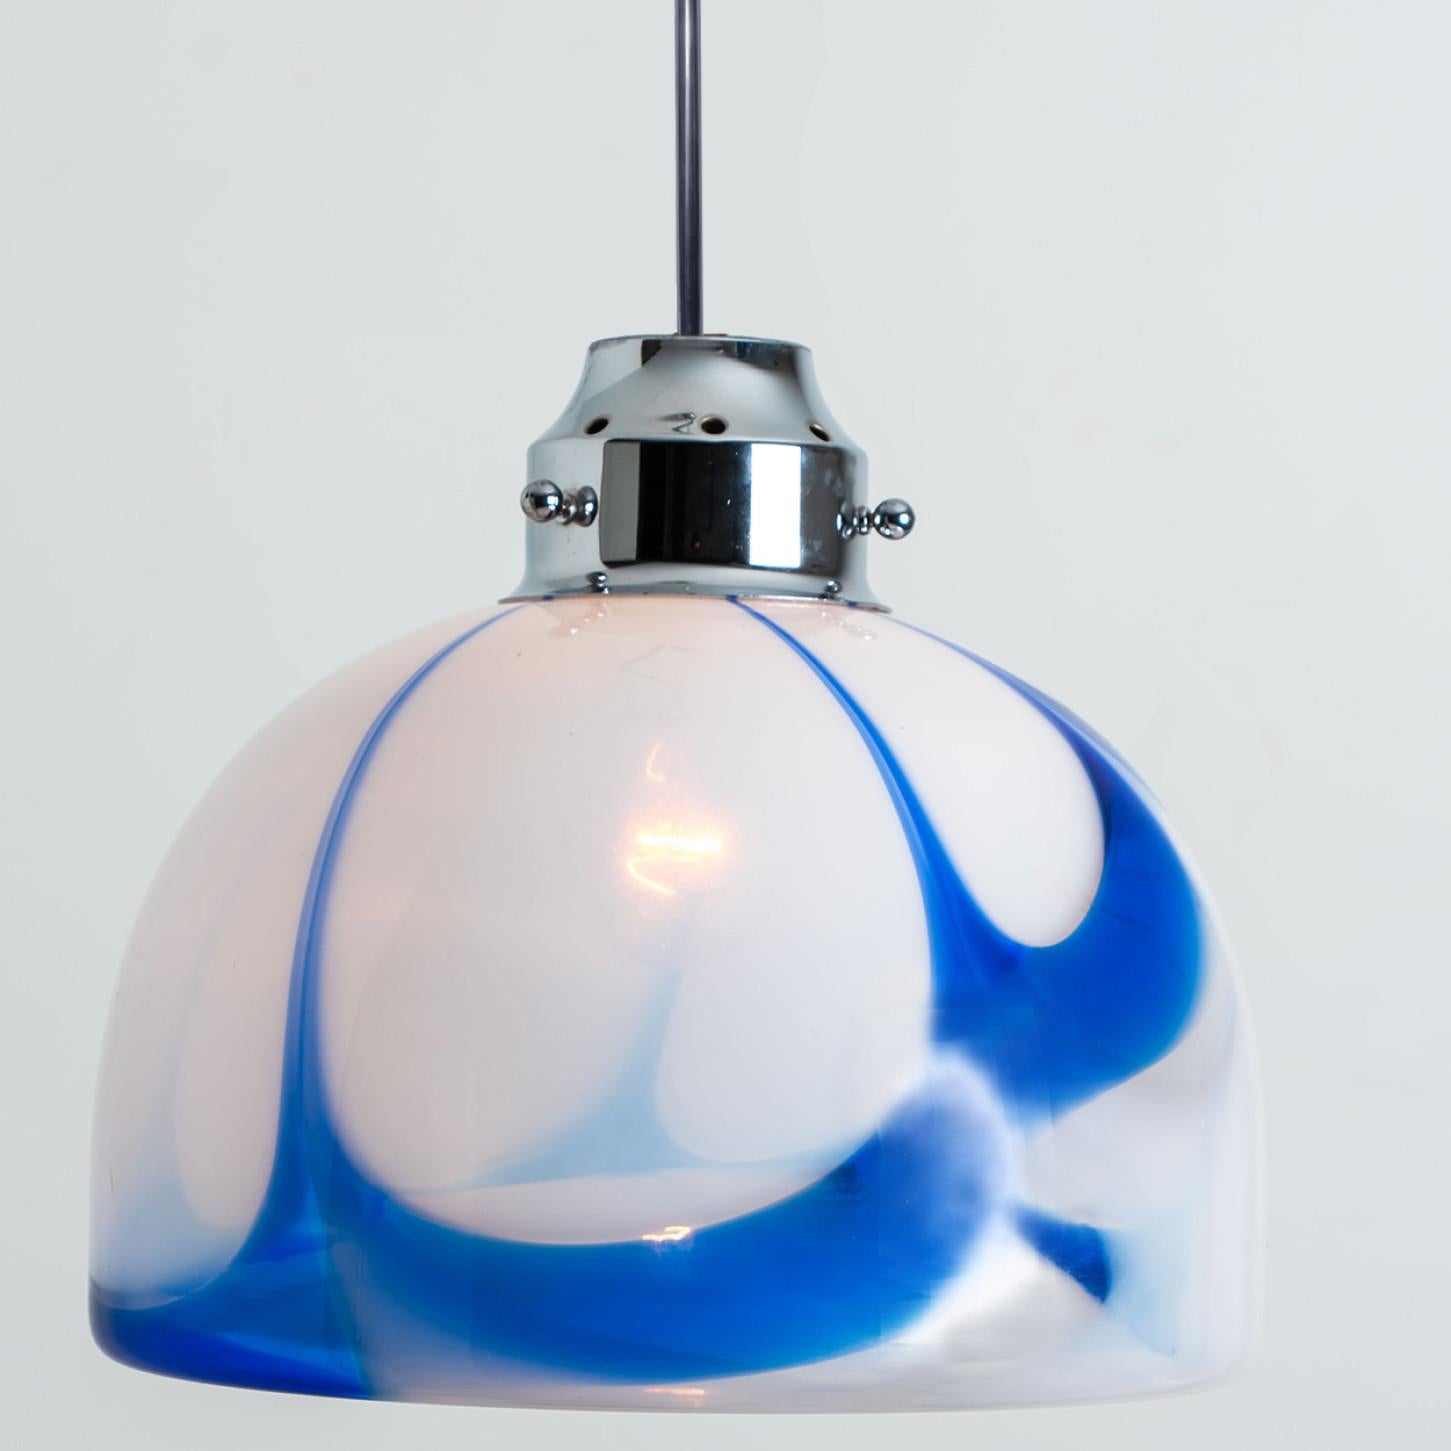 Beautiful white and blue pendant light of murano glass. Manufactured in Italy, Europe, around 1970. The Italian murano glass is hand blown.
The white opaque glass shows marbled blue pattern. The fixture is made of a chrome suspension.
The light